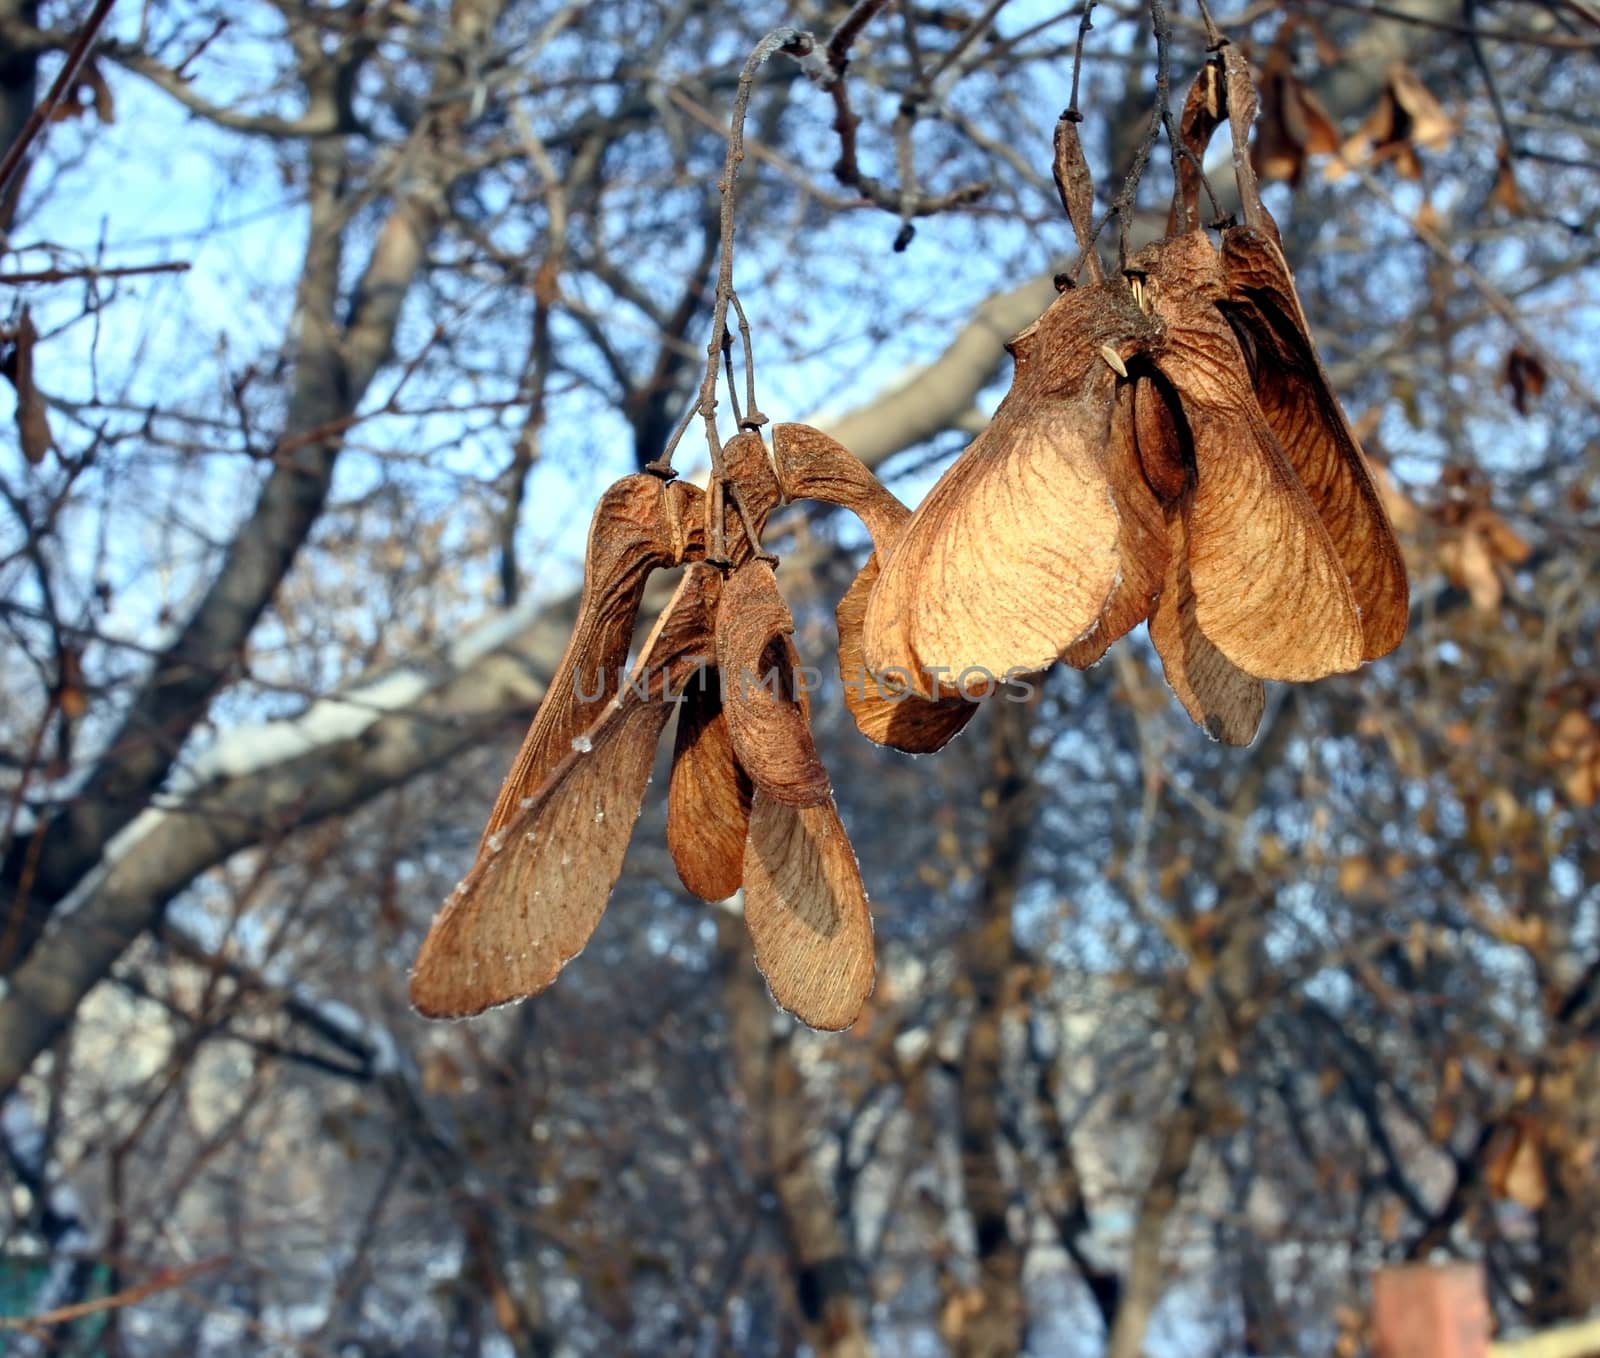 yellow maple seeds, helicopters, on a branch against the backdrop of the winter sky